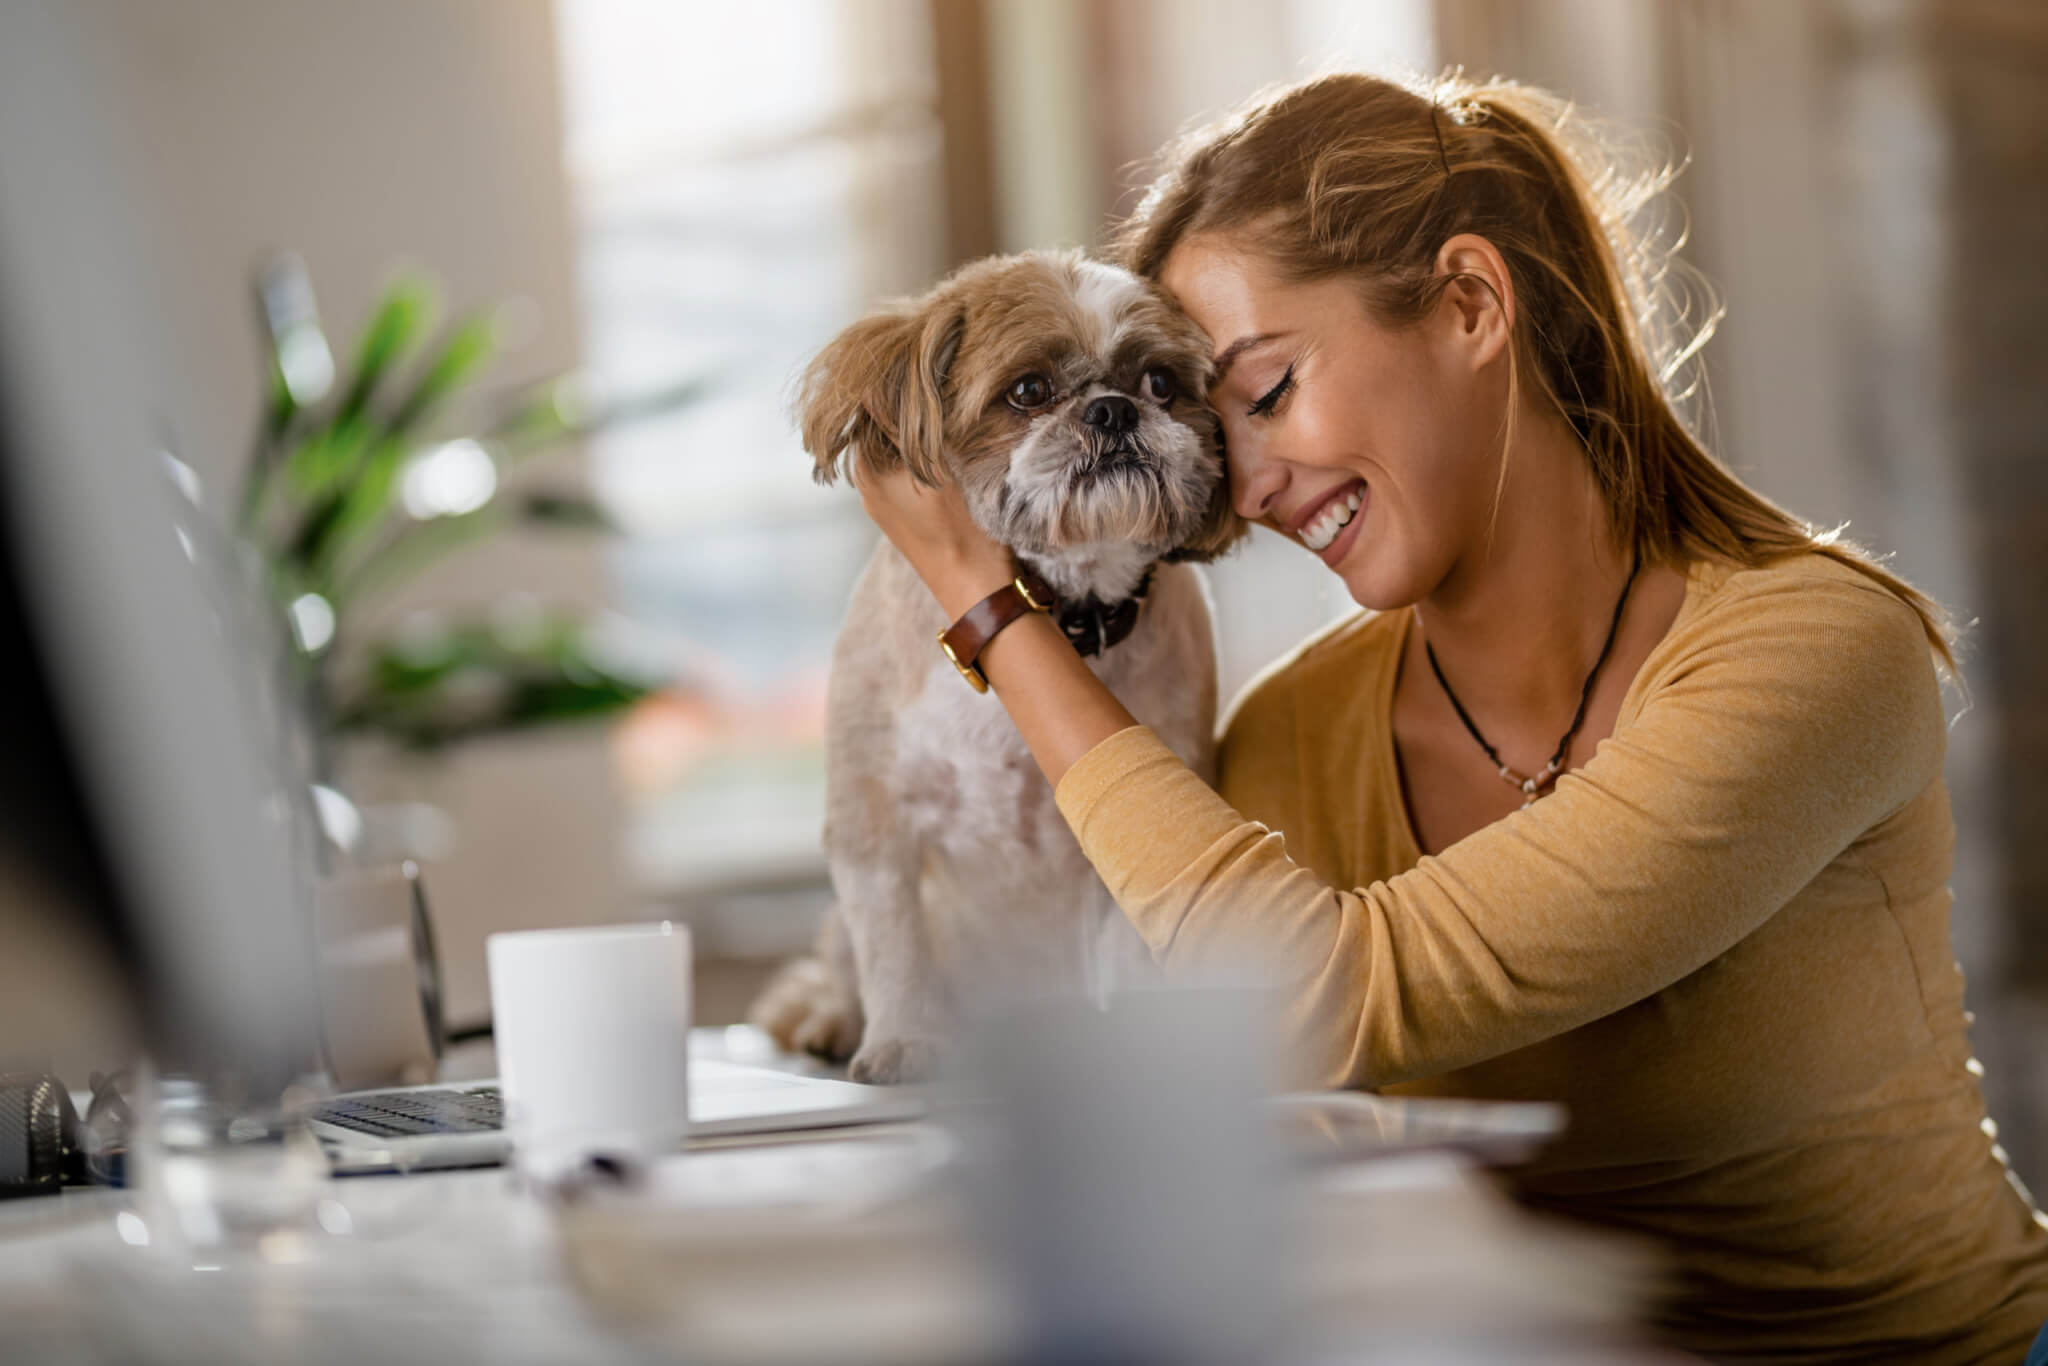 Petting, cuddling with a dog can significantly enhance your well-being